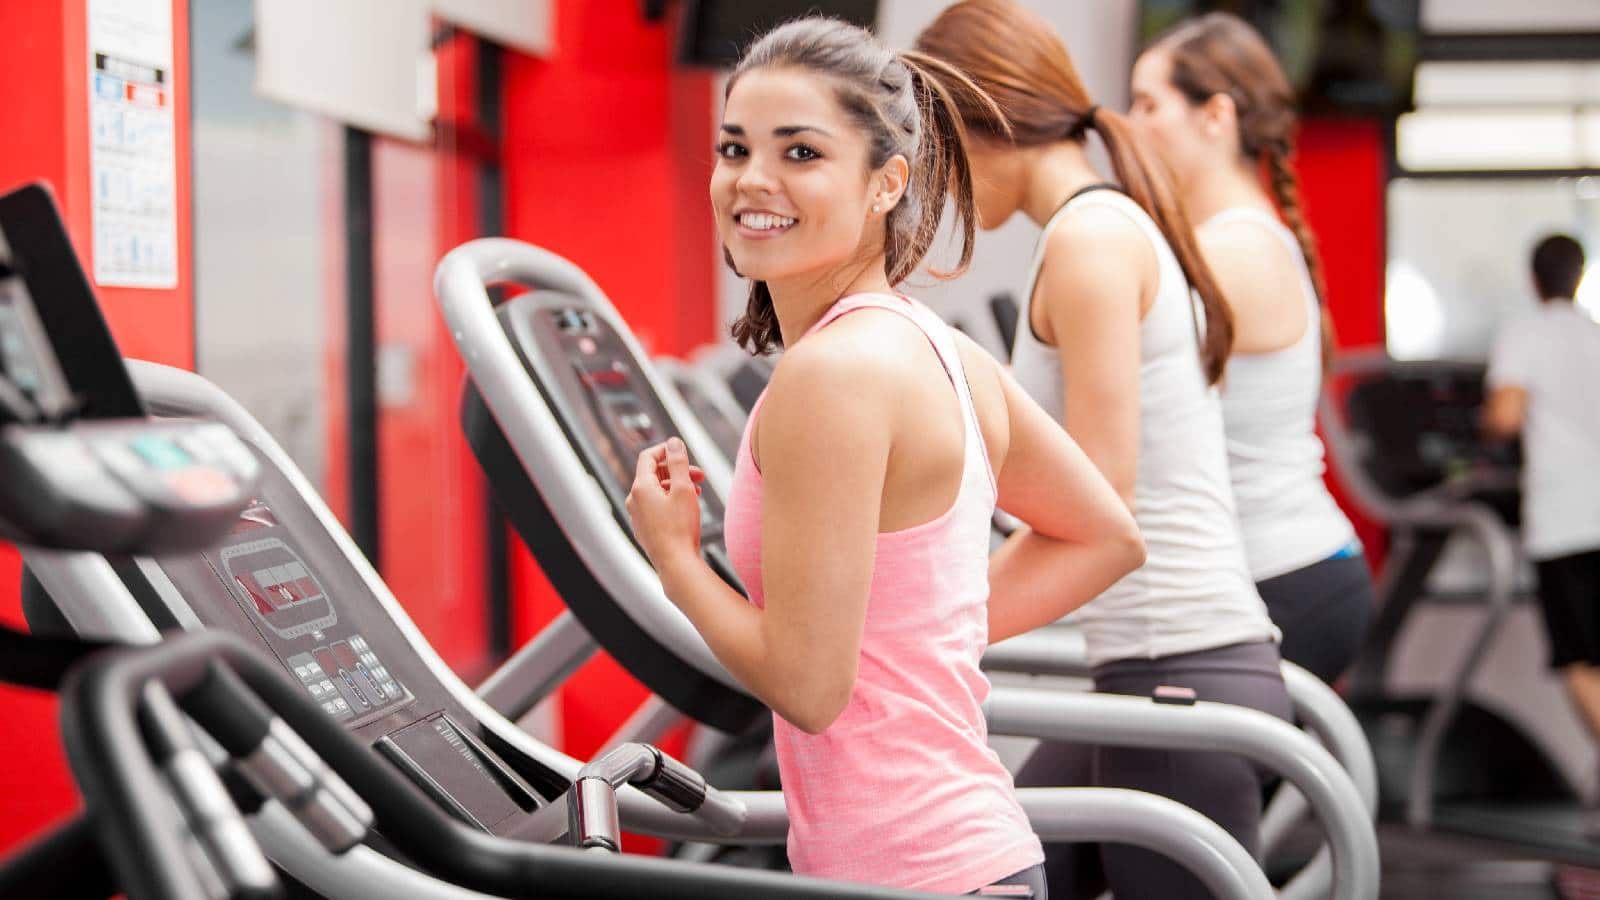 Treadmill workouts: Is it safe to go beyond walking or running to burn calories?